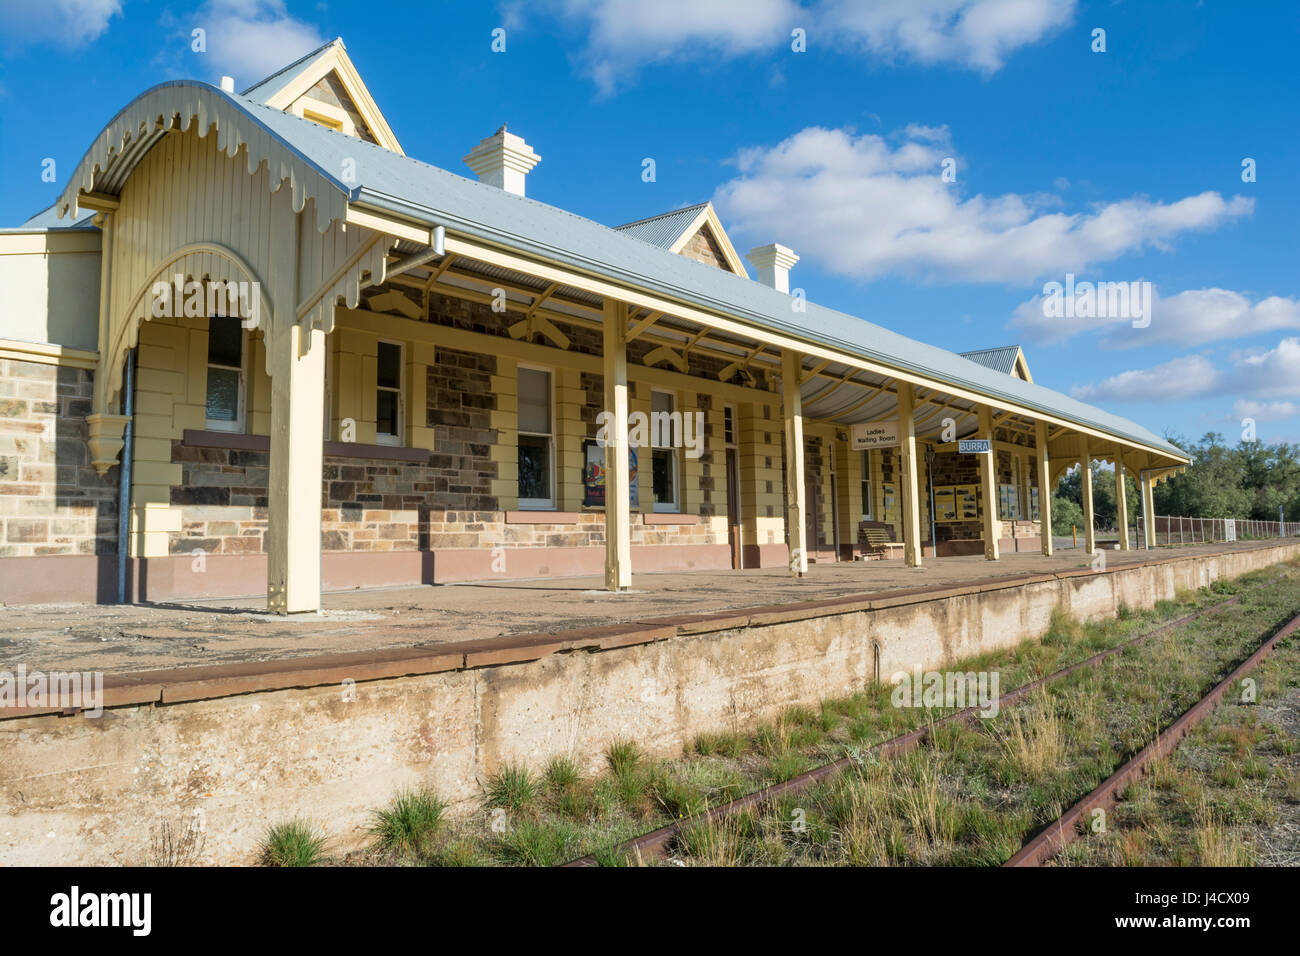 Burra, South Australia, Australia - June 4 2016: The historic site of the Old Burra Railway Station which was newly restored and reopened in March 201 Stock Photo